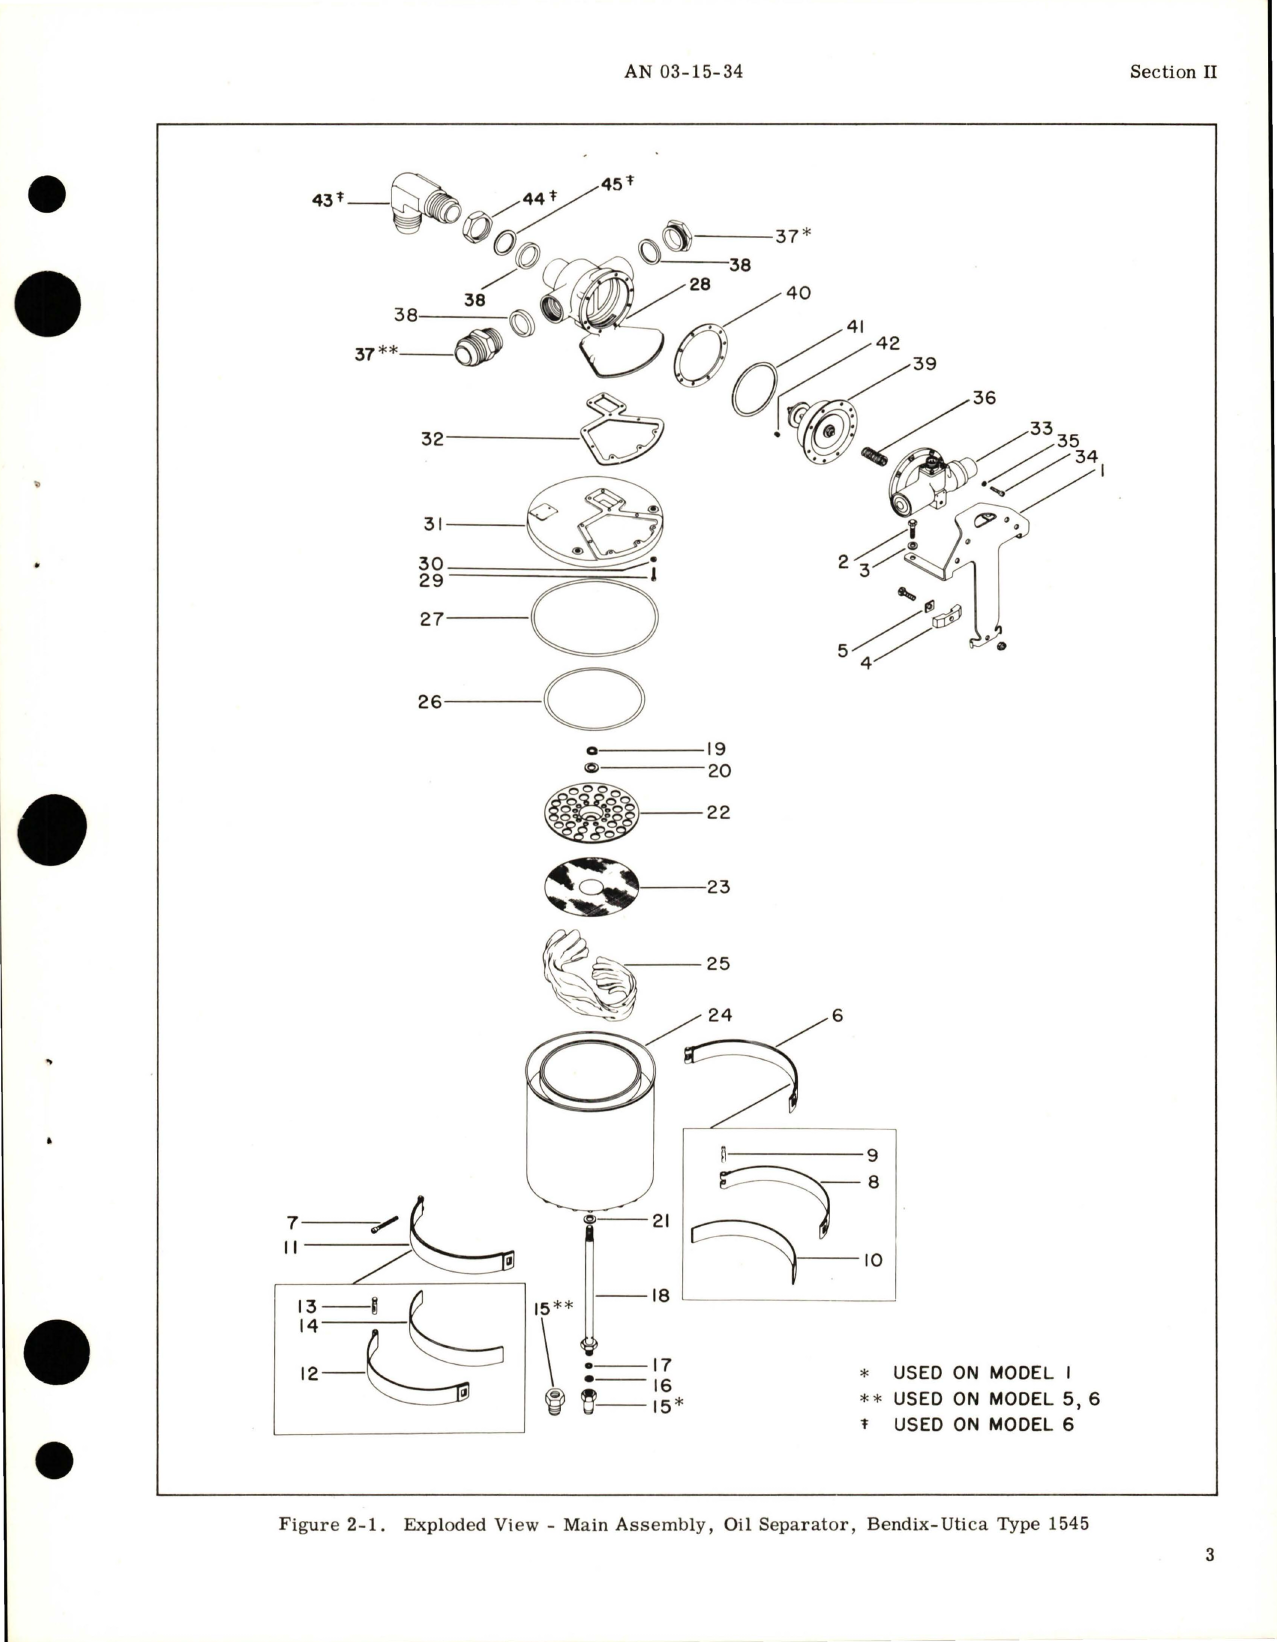 Sample page 7 from AirCorps Library document: Overhaul Instructions for Oil Separator - Parts 659-1-A, 1545-1-C, 1545-1-D, 1545-5-D, 1545-6-D, and 1545-6-E 